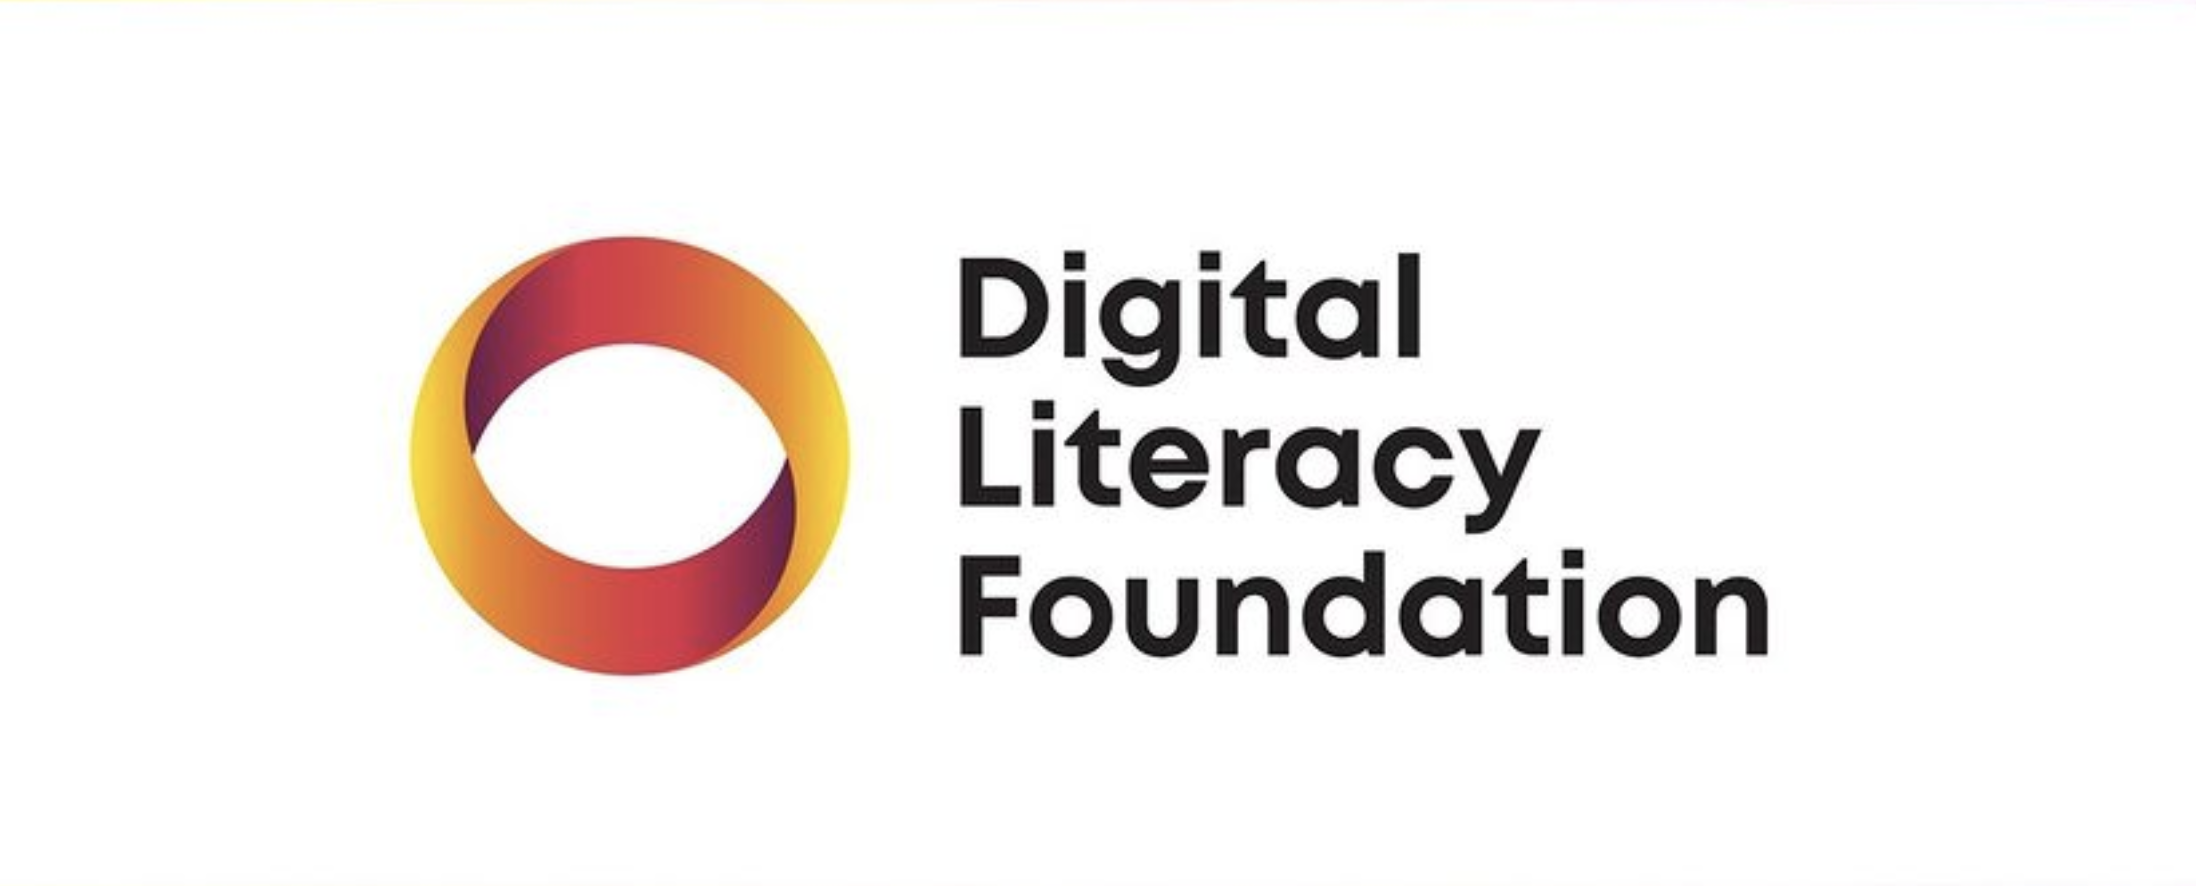 A gradient yellow, orange and purple circle logo on a white background. Text says Digital Literacy Foundation in black text.